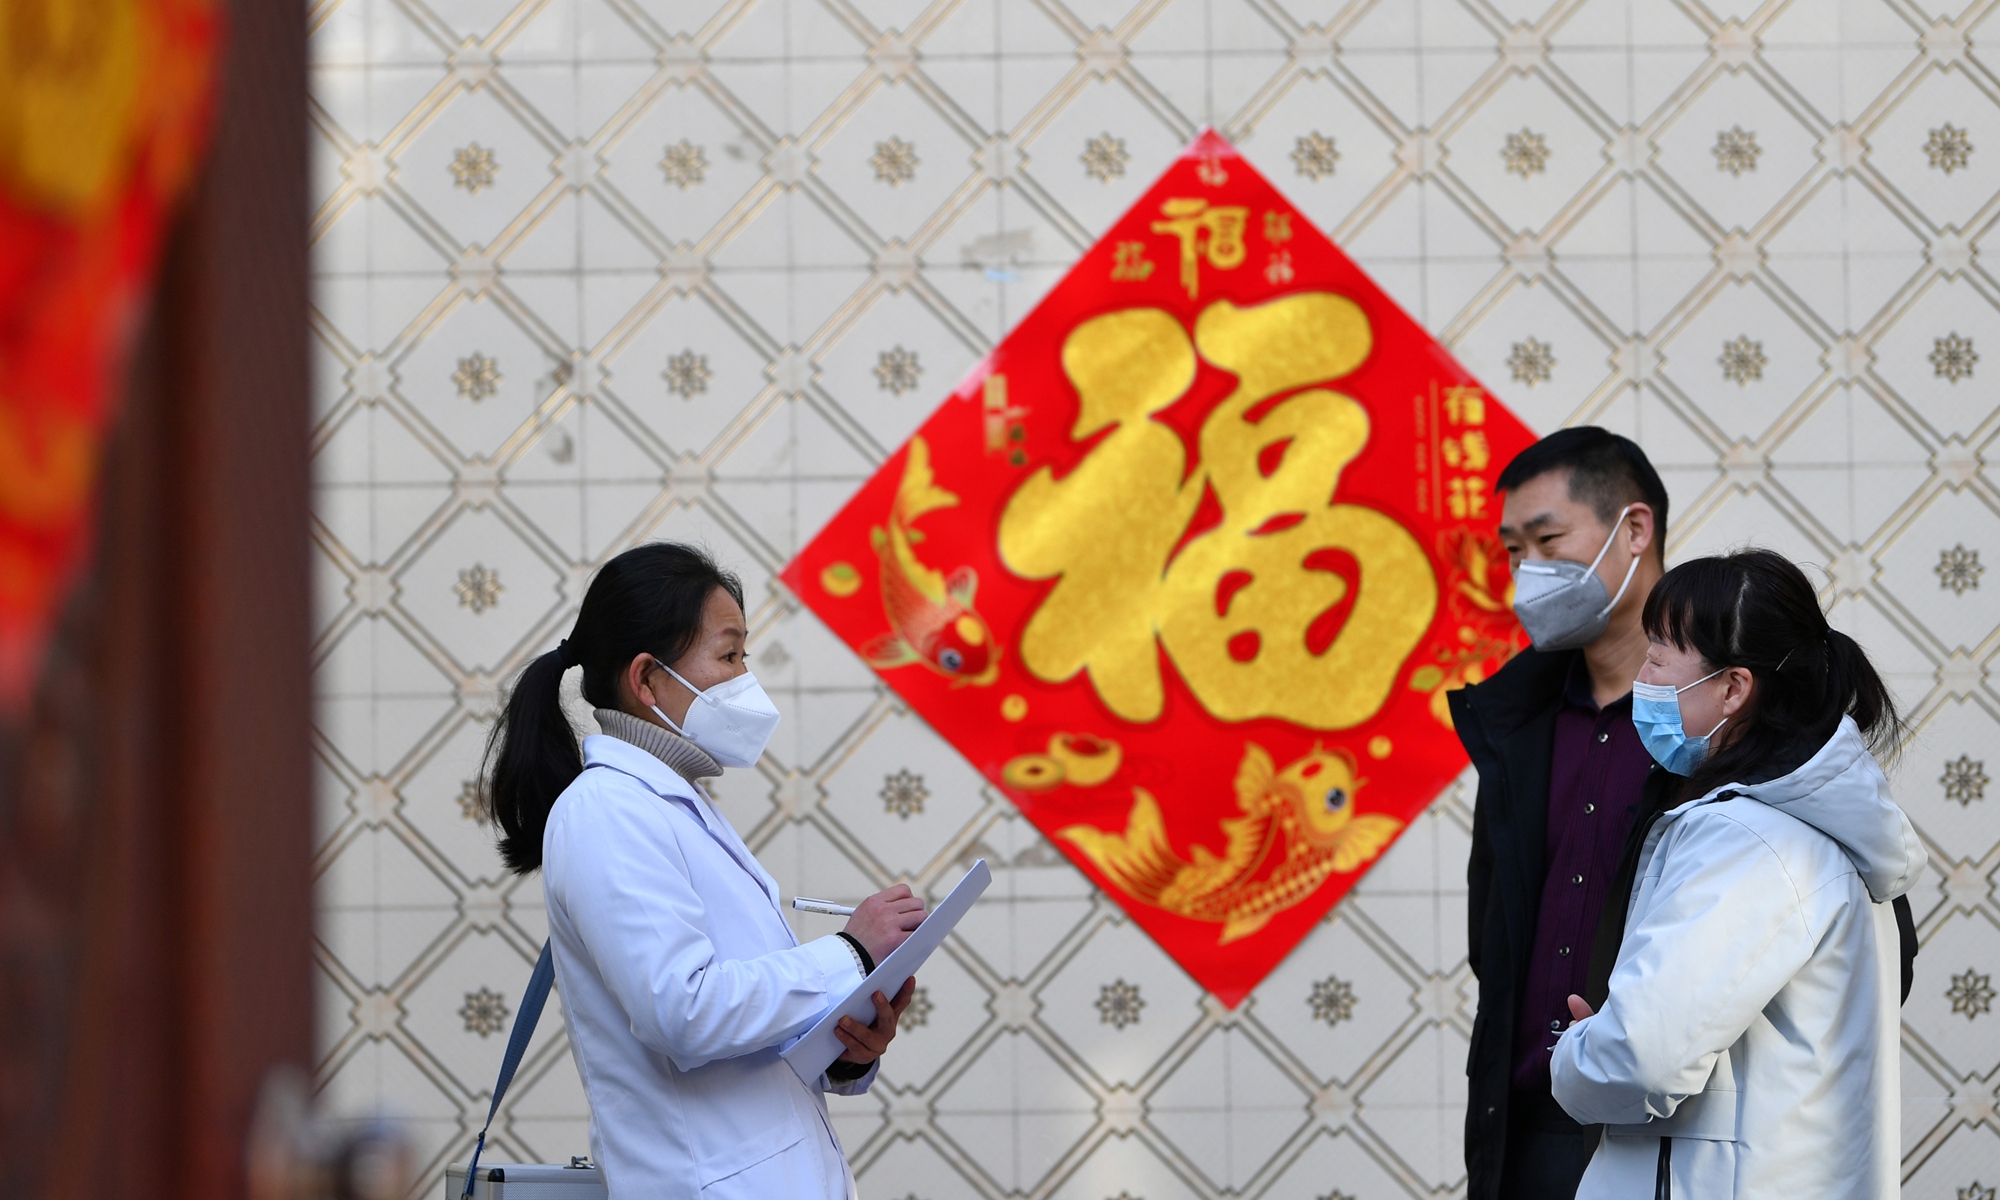 A rural doctor follows up with residents to check their health condition in rural area of North China's Shijiazhuang on January 21, 2023. Photo: VCG